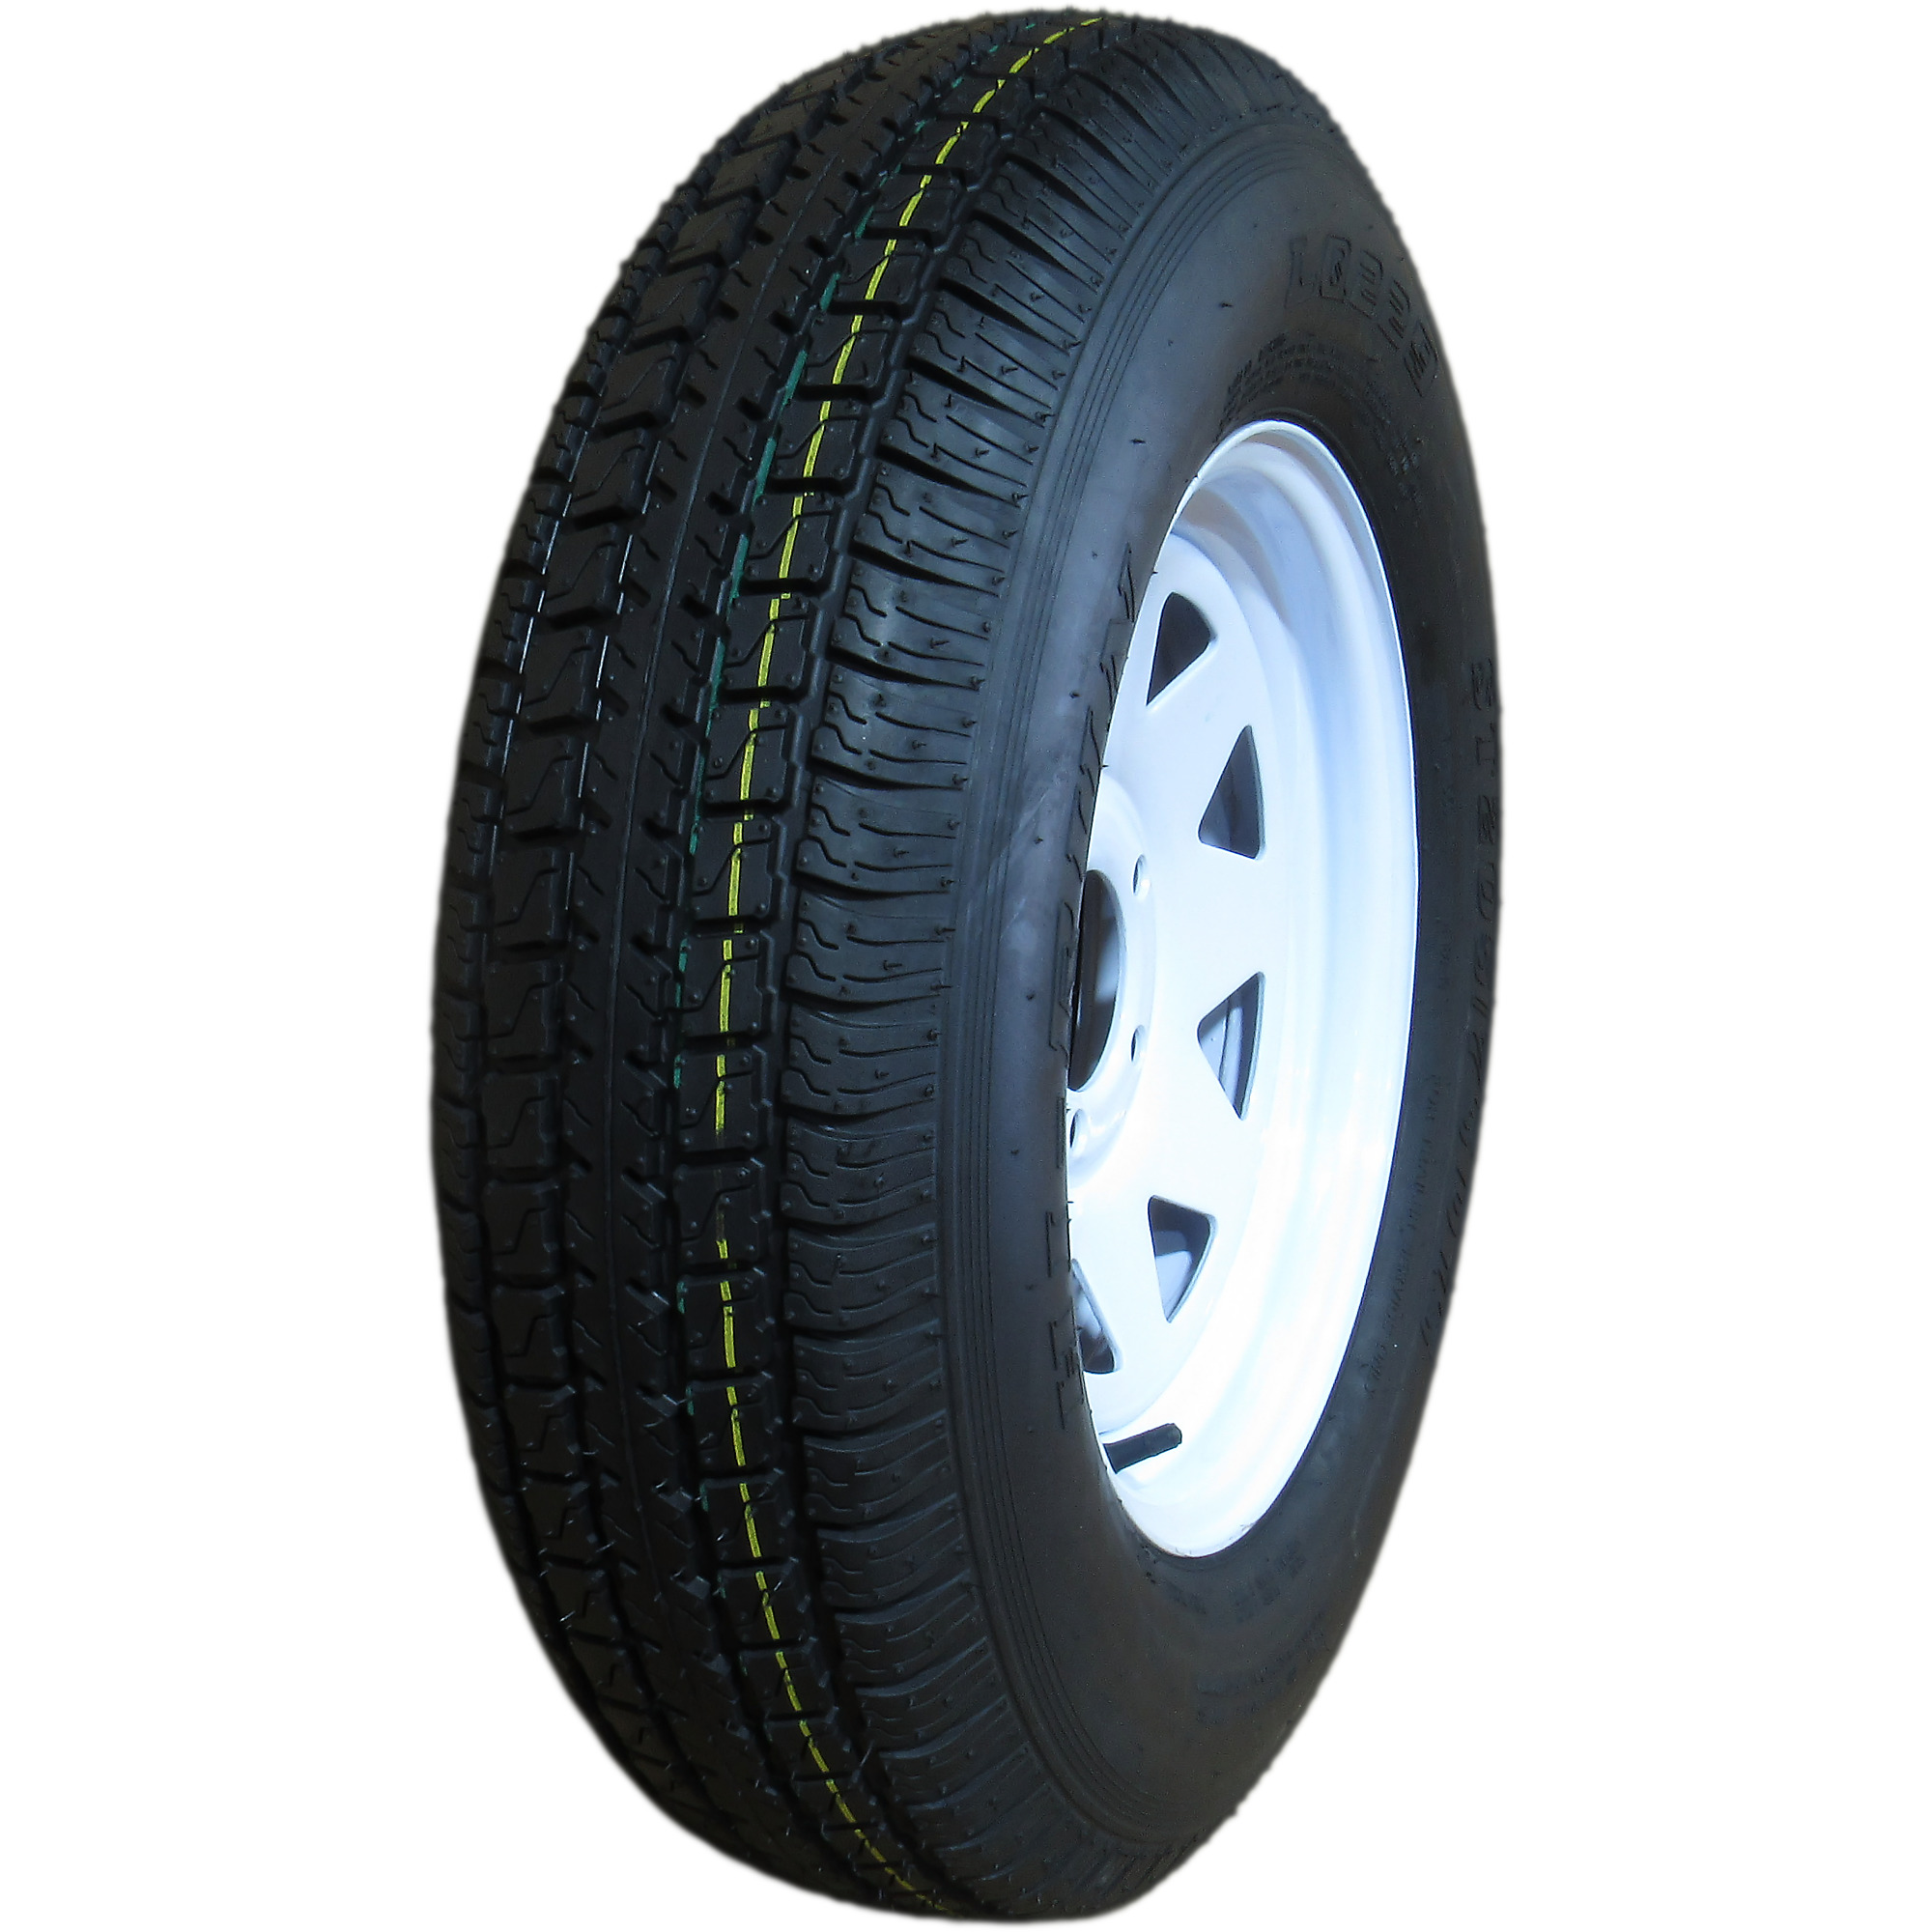 HI-RUN, Highway Trailer Tire Assembly, Bias-Ply, Spoked, Tire Size ST215/75D14 Load Range Rating C, Bolt Holes (qty.) 5 Model ASB1207